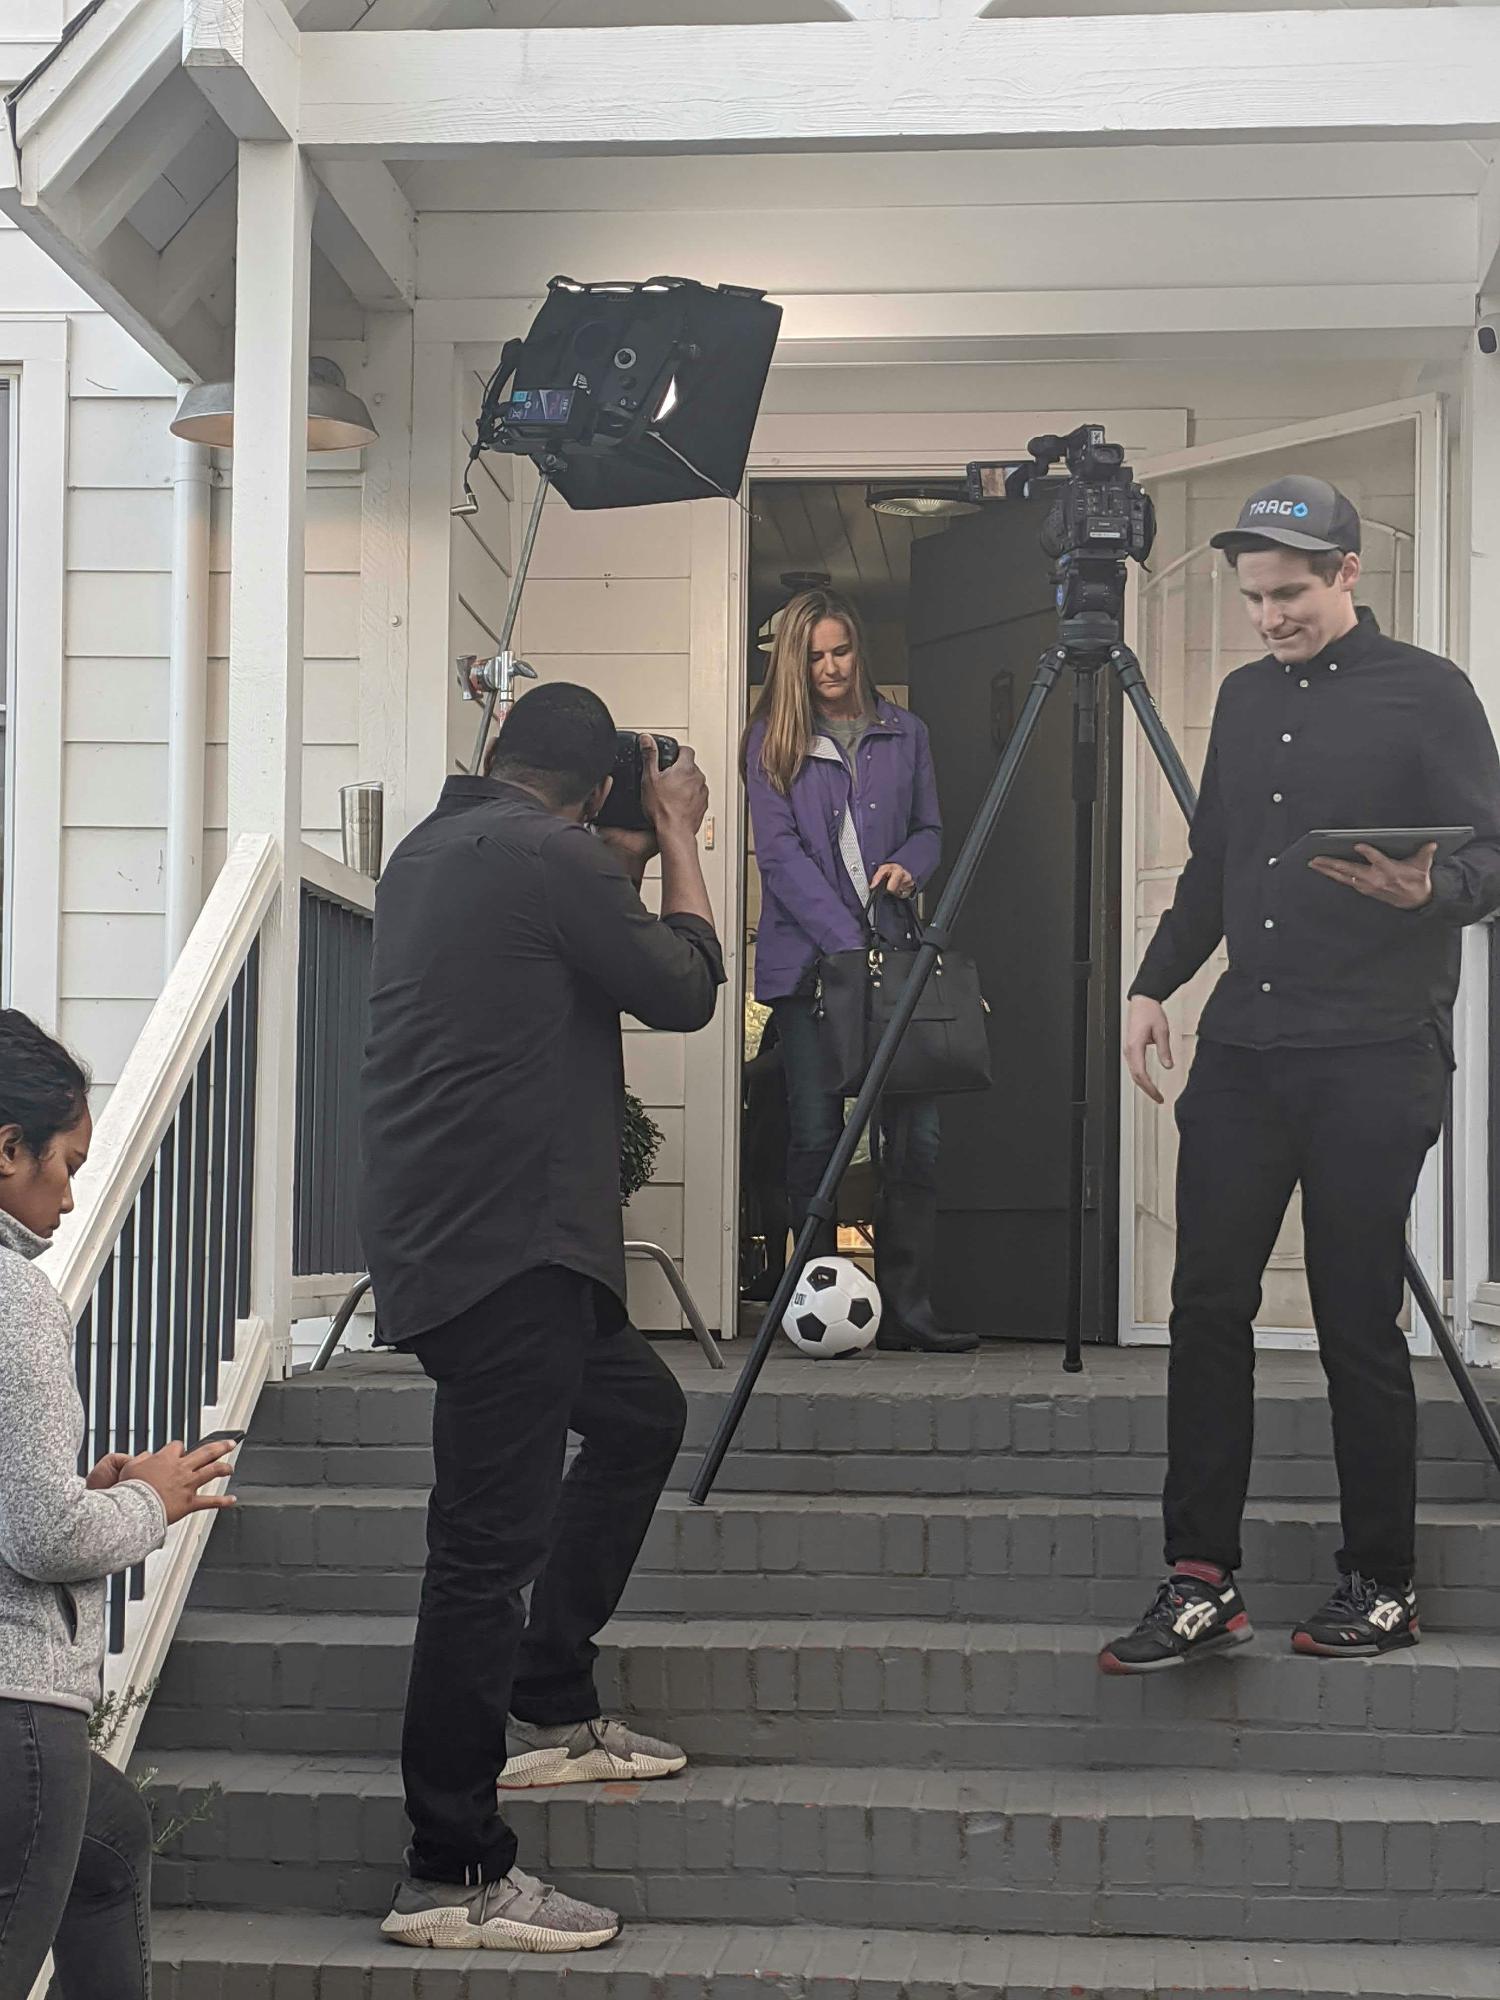 Behind-the-scenes look at a commercial we did with soccer star Brandi Chastain in 2019.